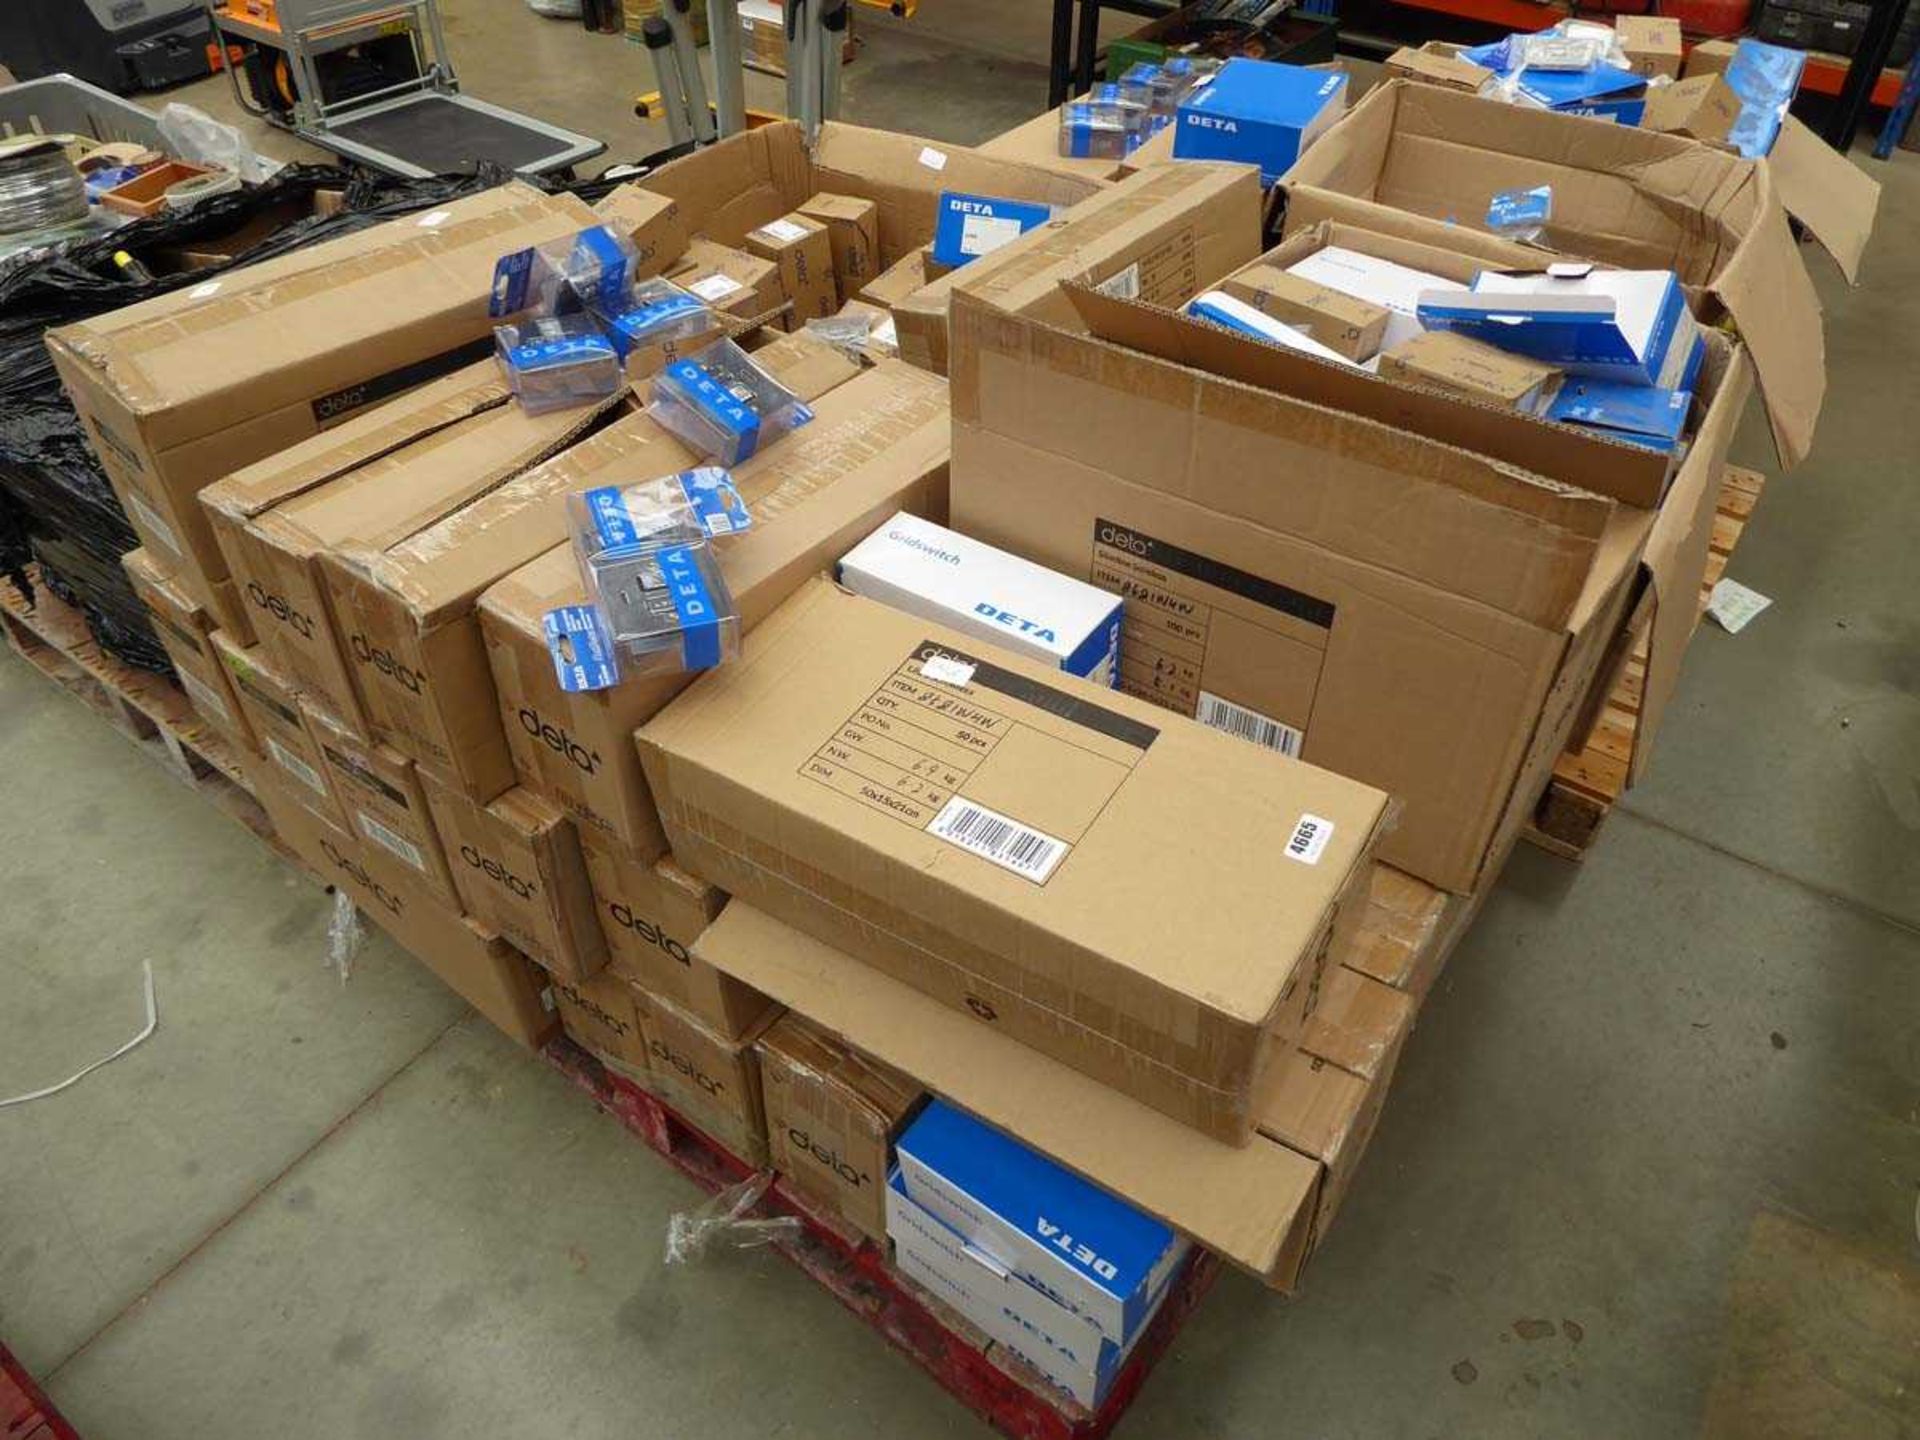 2 pallets containing electrical switches, sockets, TV outlets, etc.